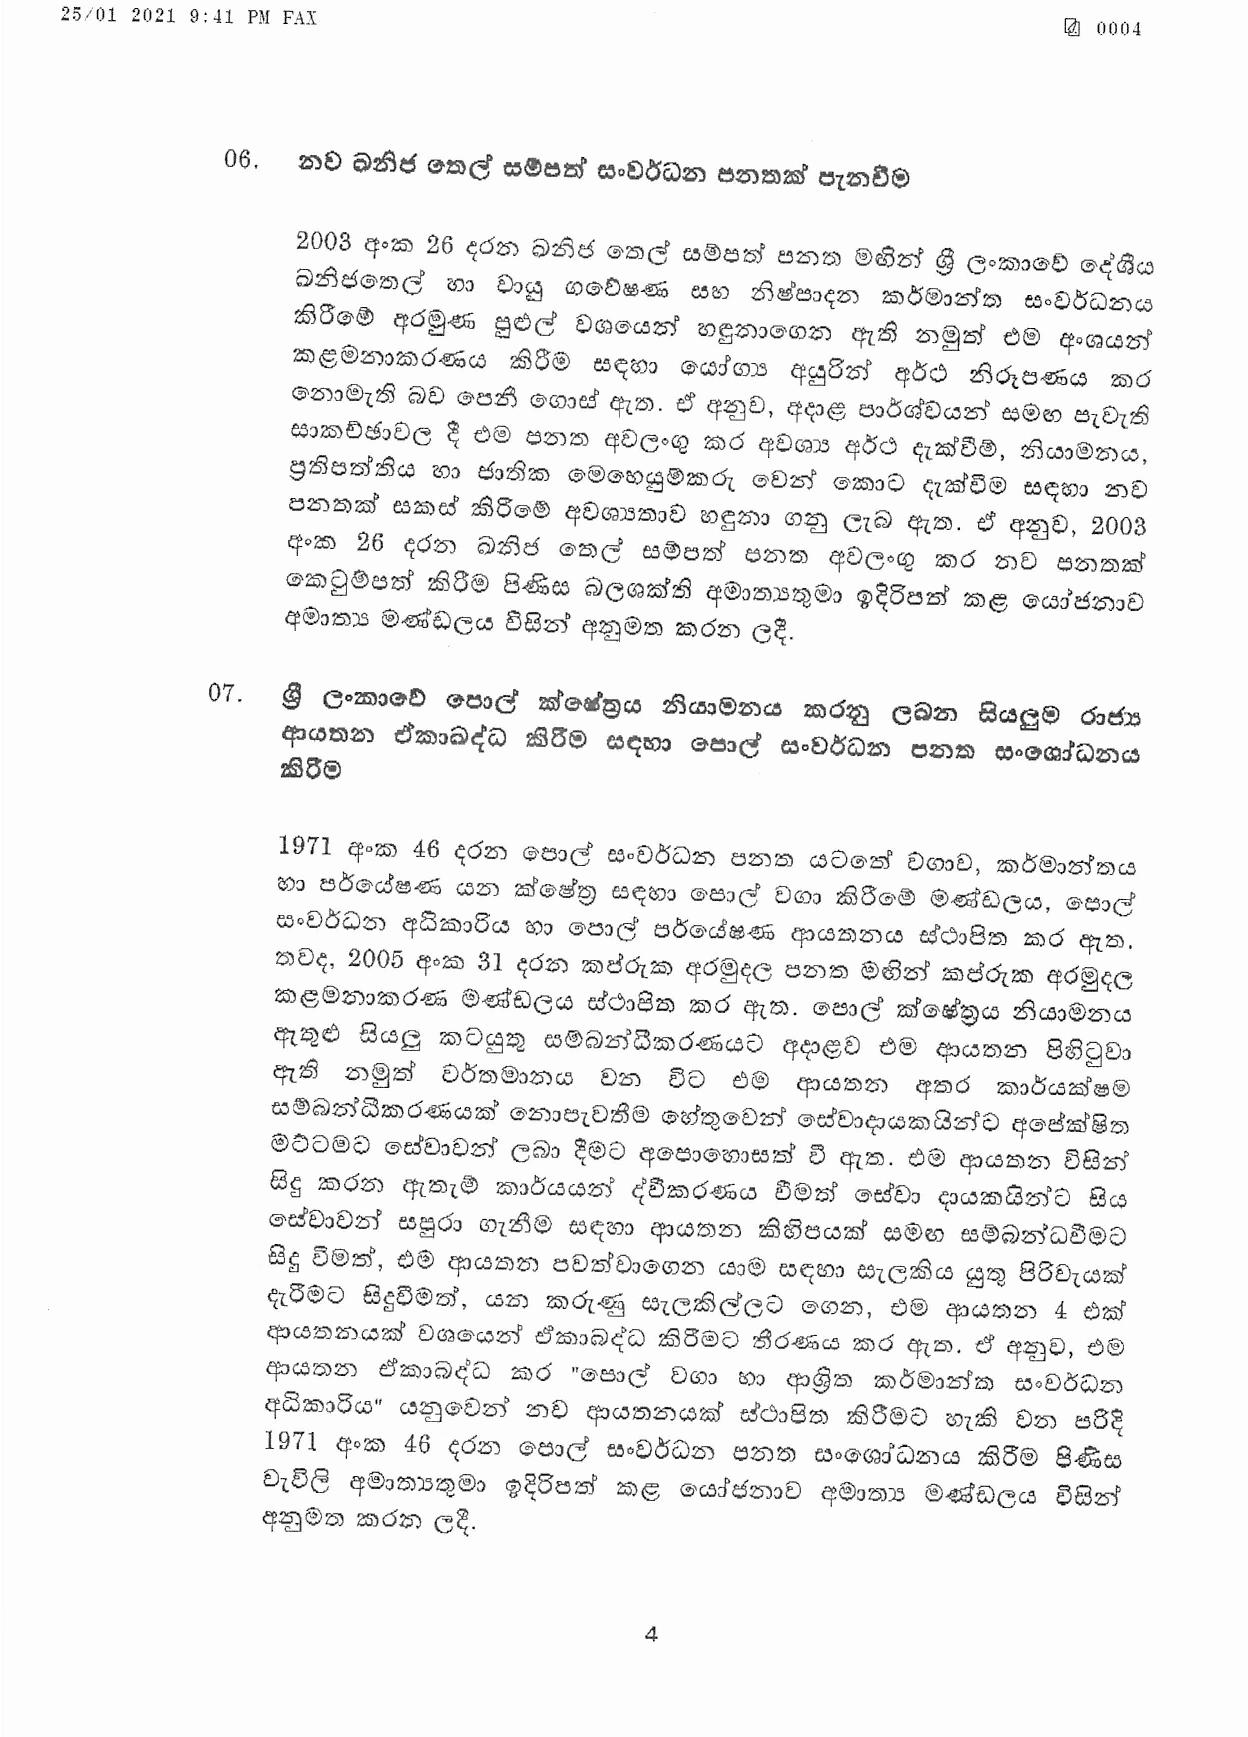 Cabinet Decision on 25.01.2021 page 004